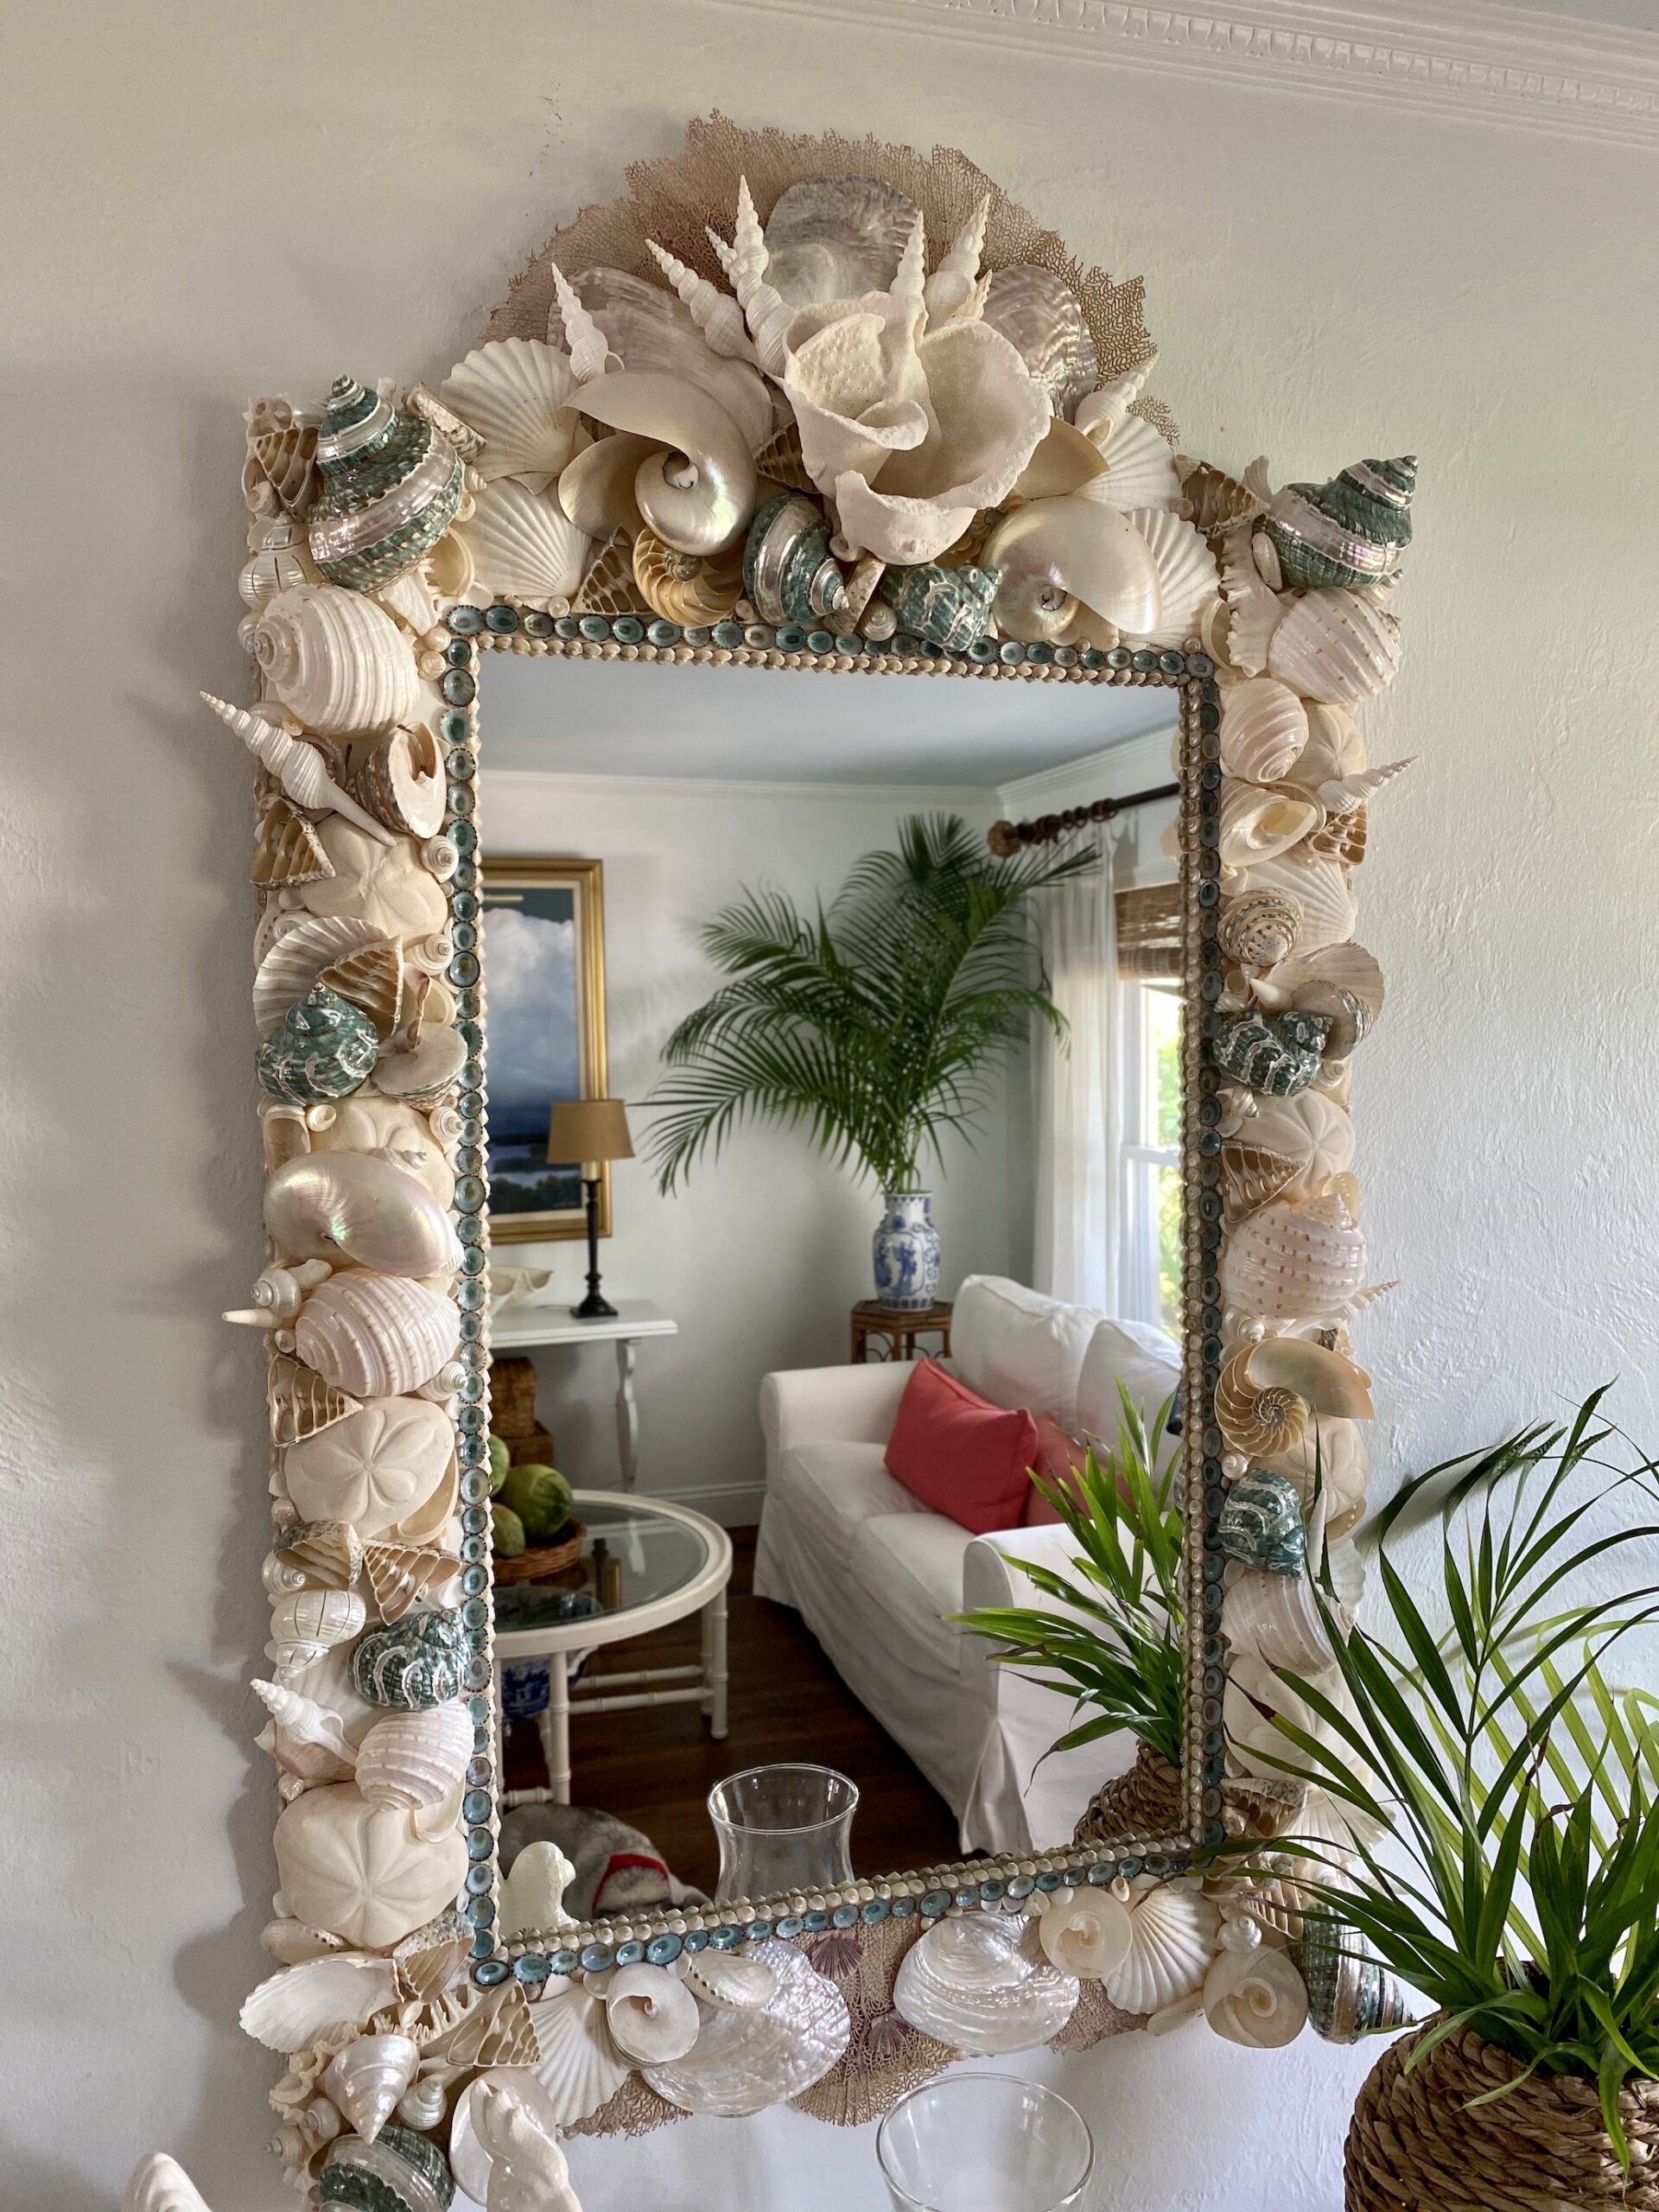 Large shell mirror made with mostly white shells and coral with turquoise shells used as accents. Palm tree reflected in the mirror